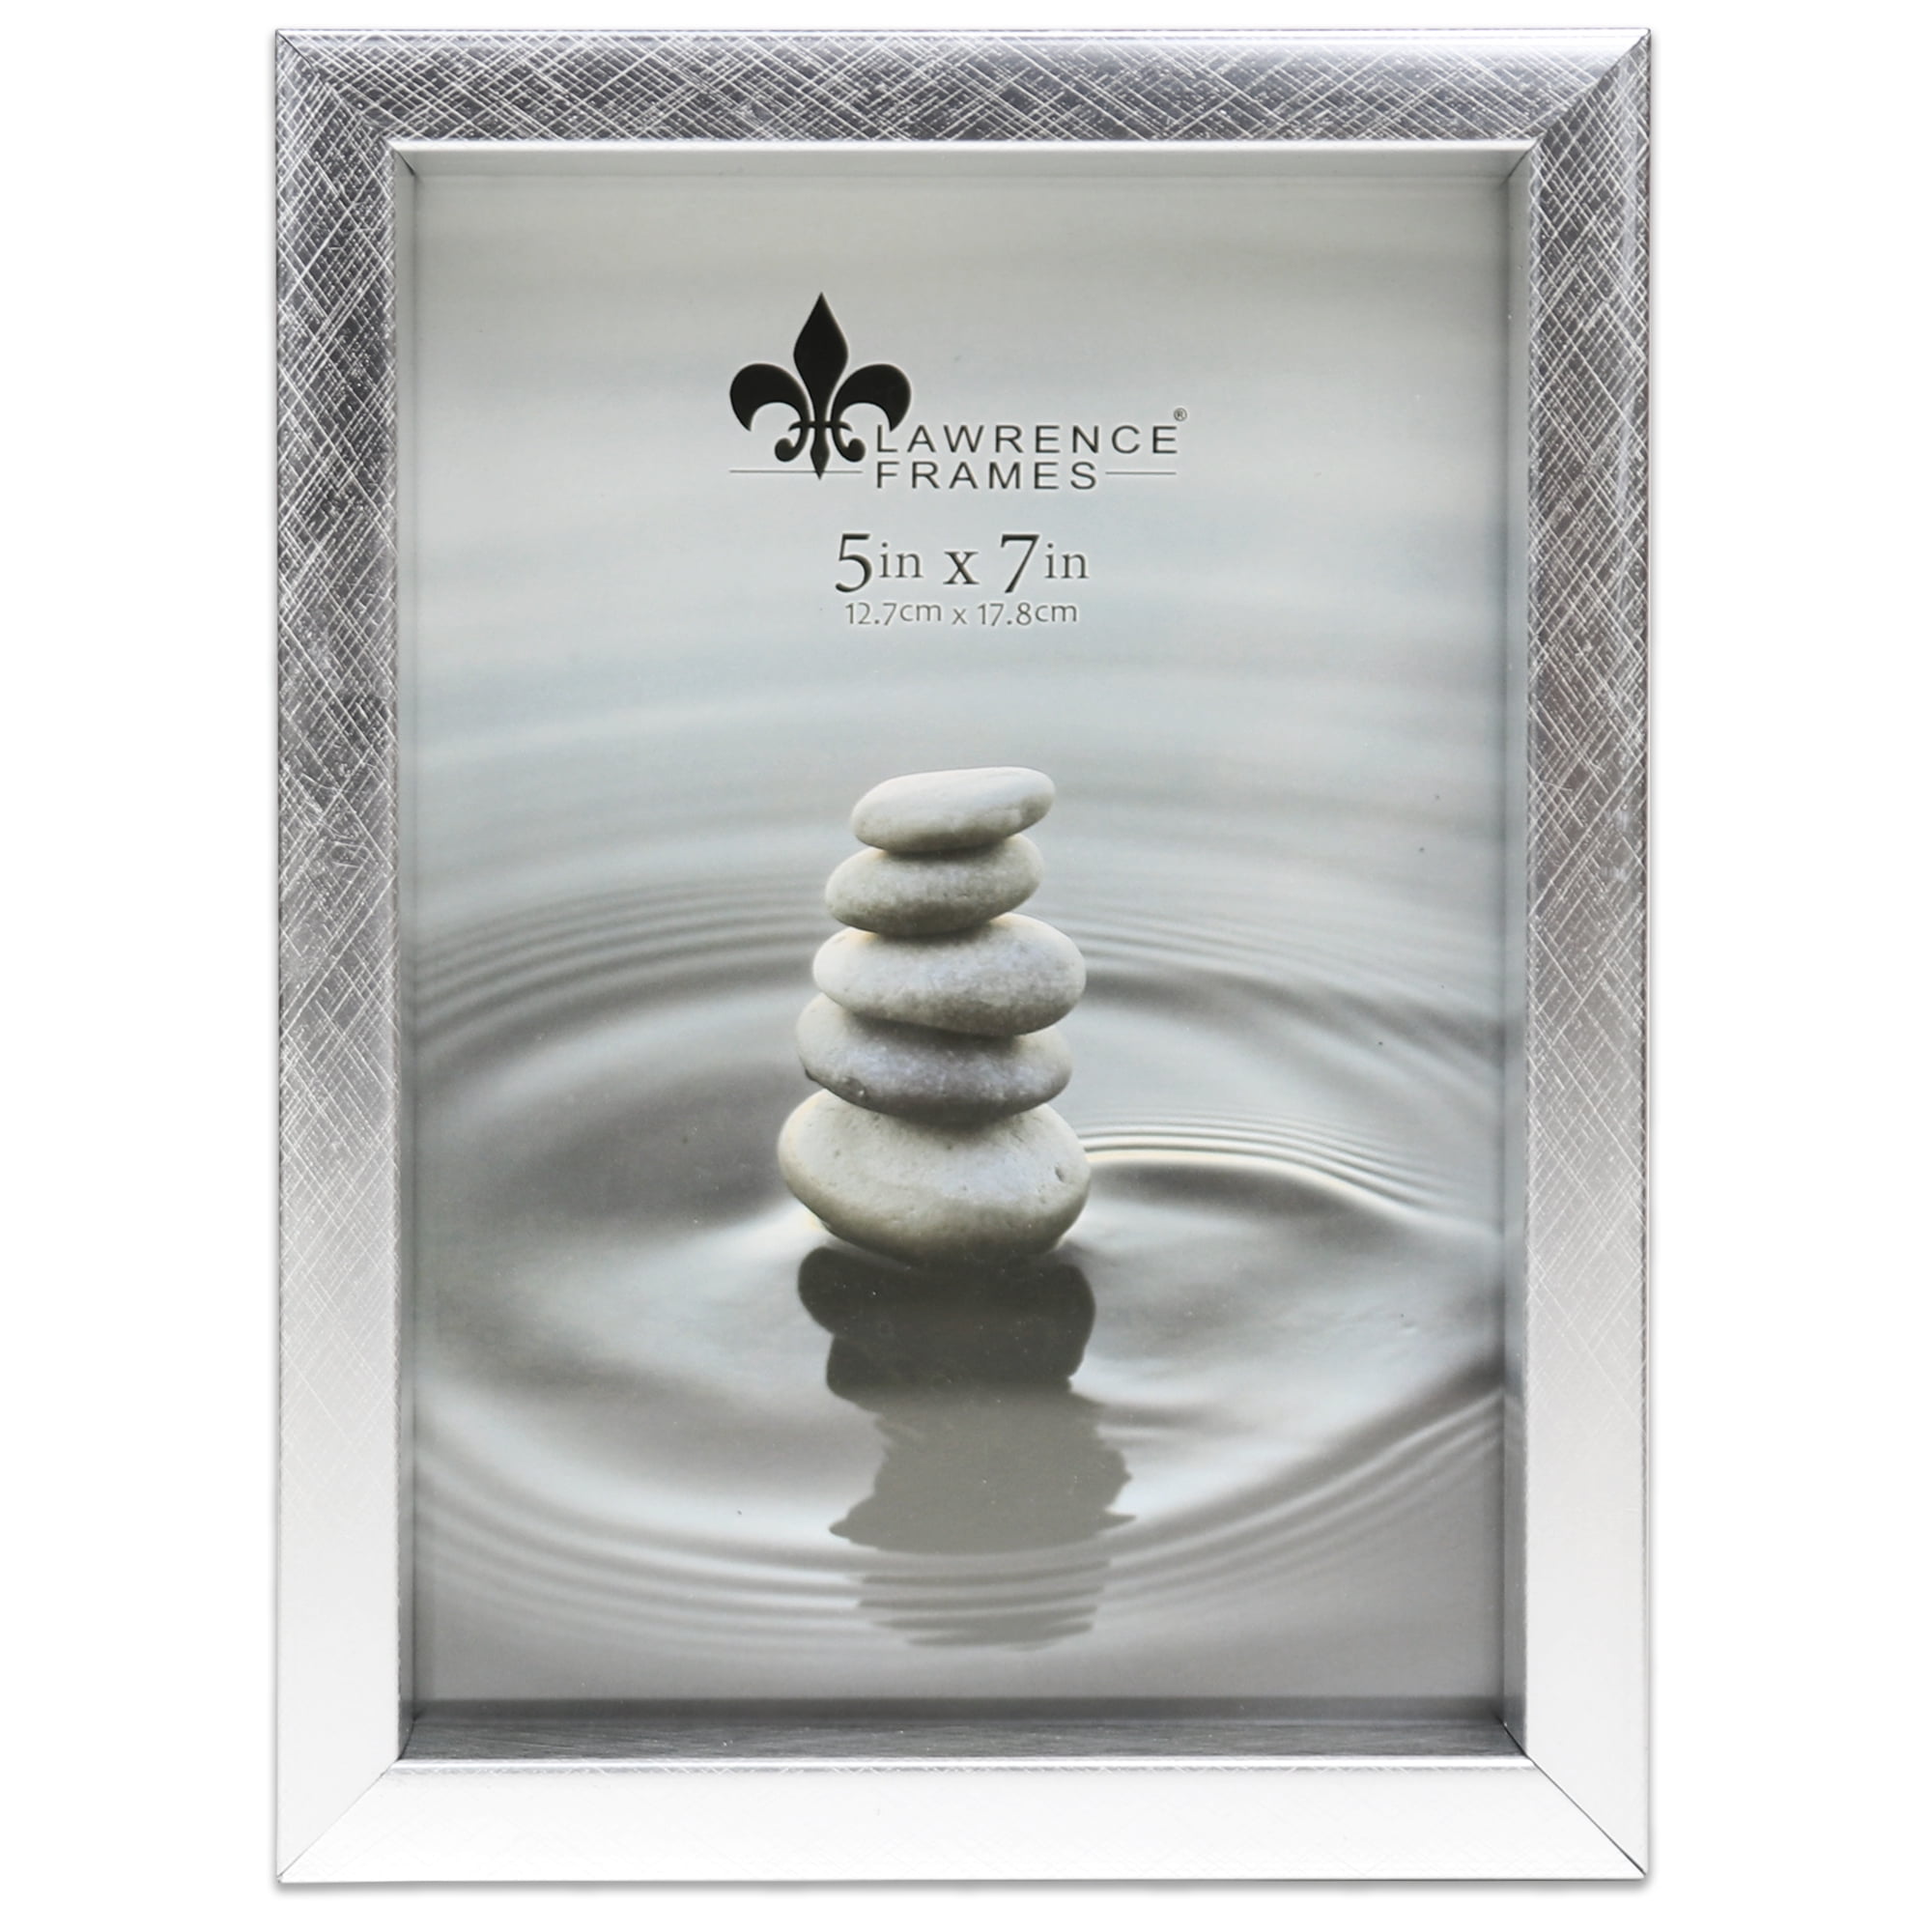 Lawrence Frames 1.05 in x 7.6 in Polystyrene Picture Frame, Silver 